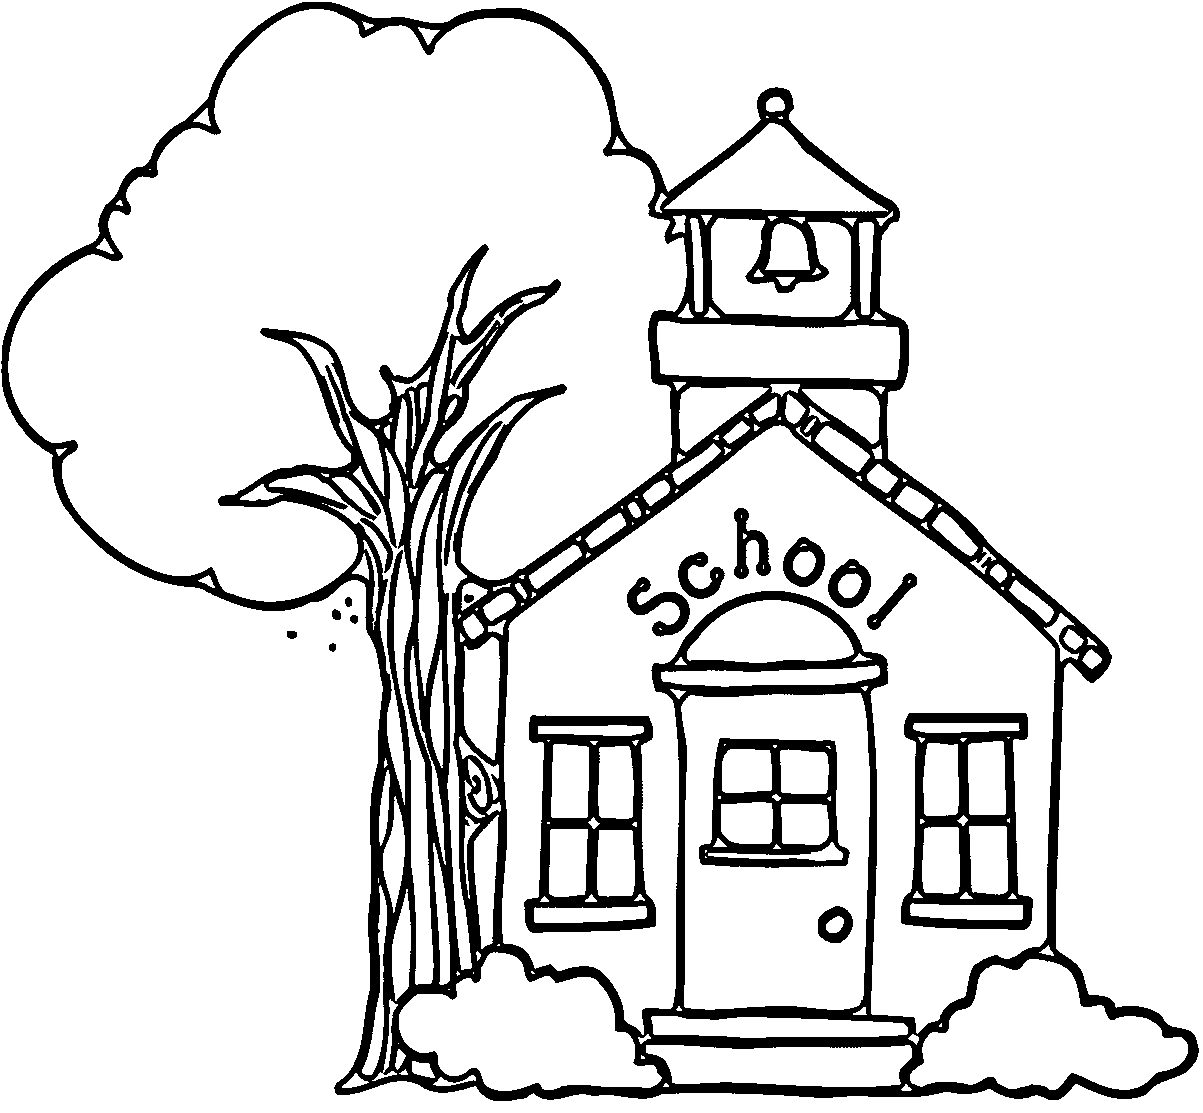 School Coloring Page - Free Printable Coloring Pages for Kids